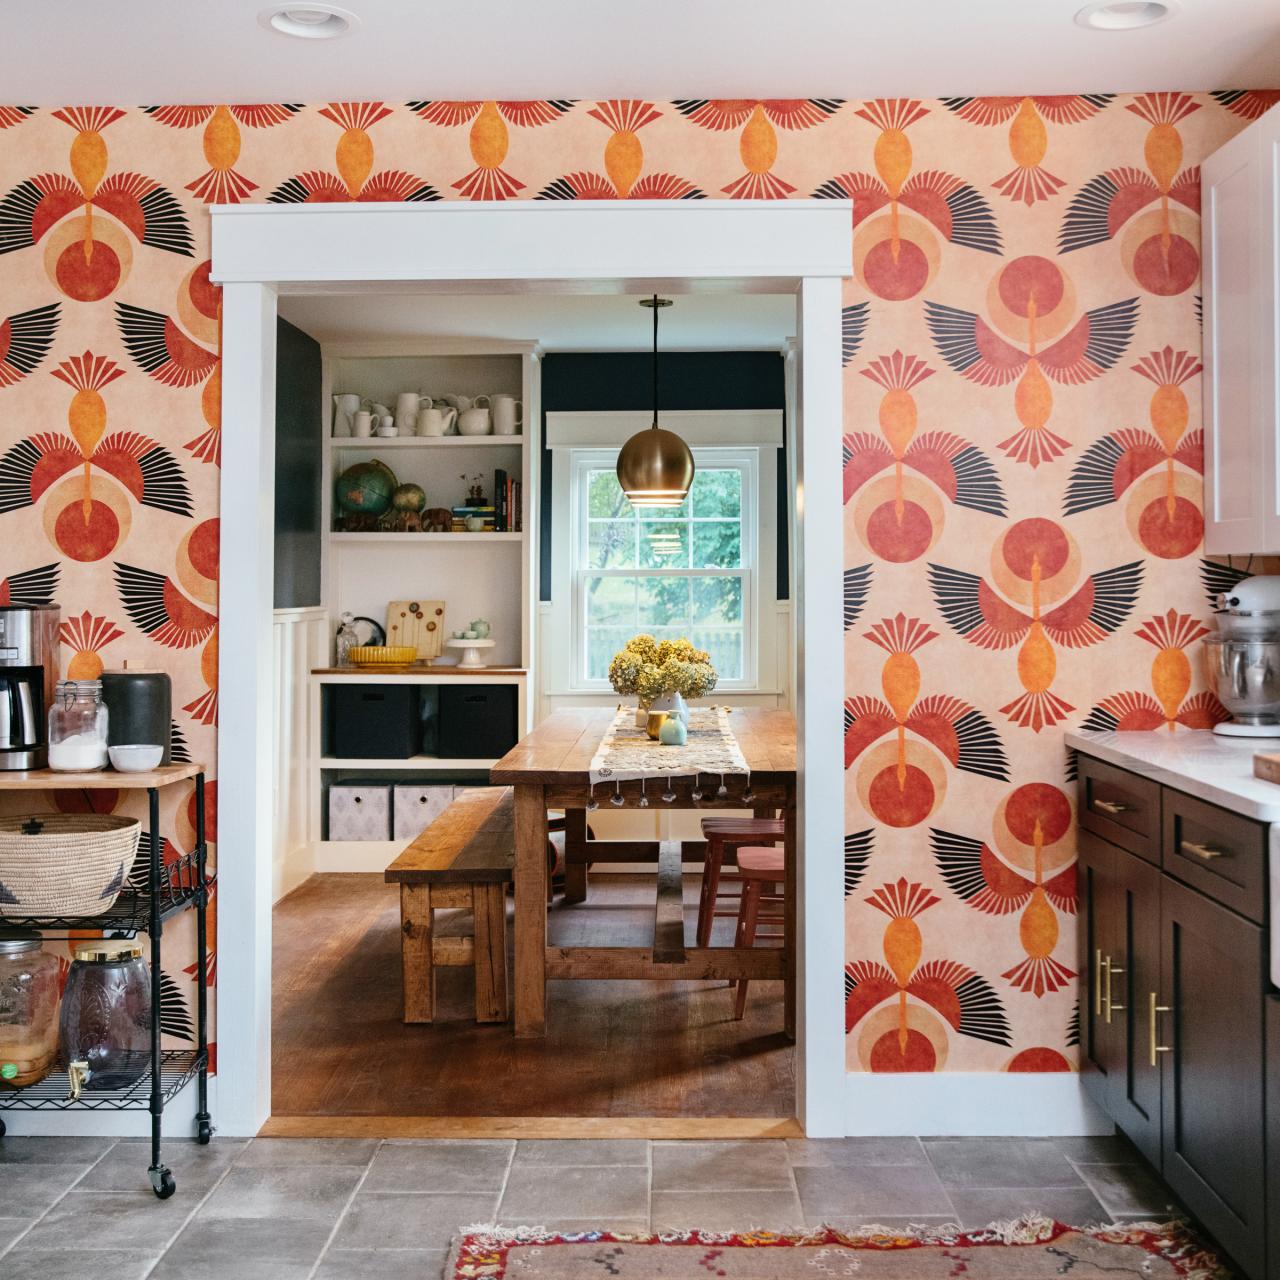 5 Day Wallpapering Course | Able Skills